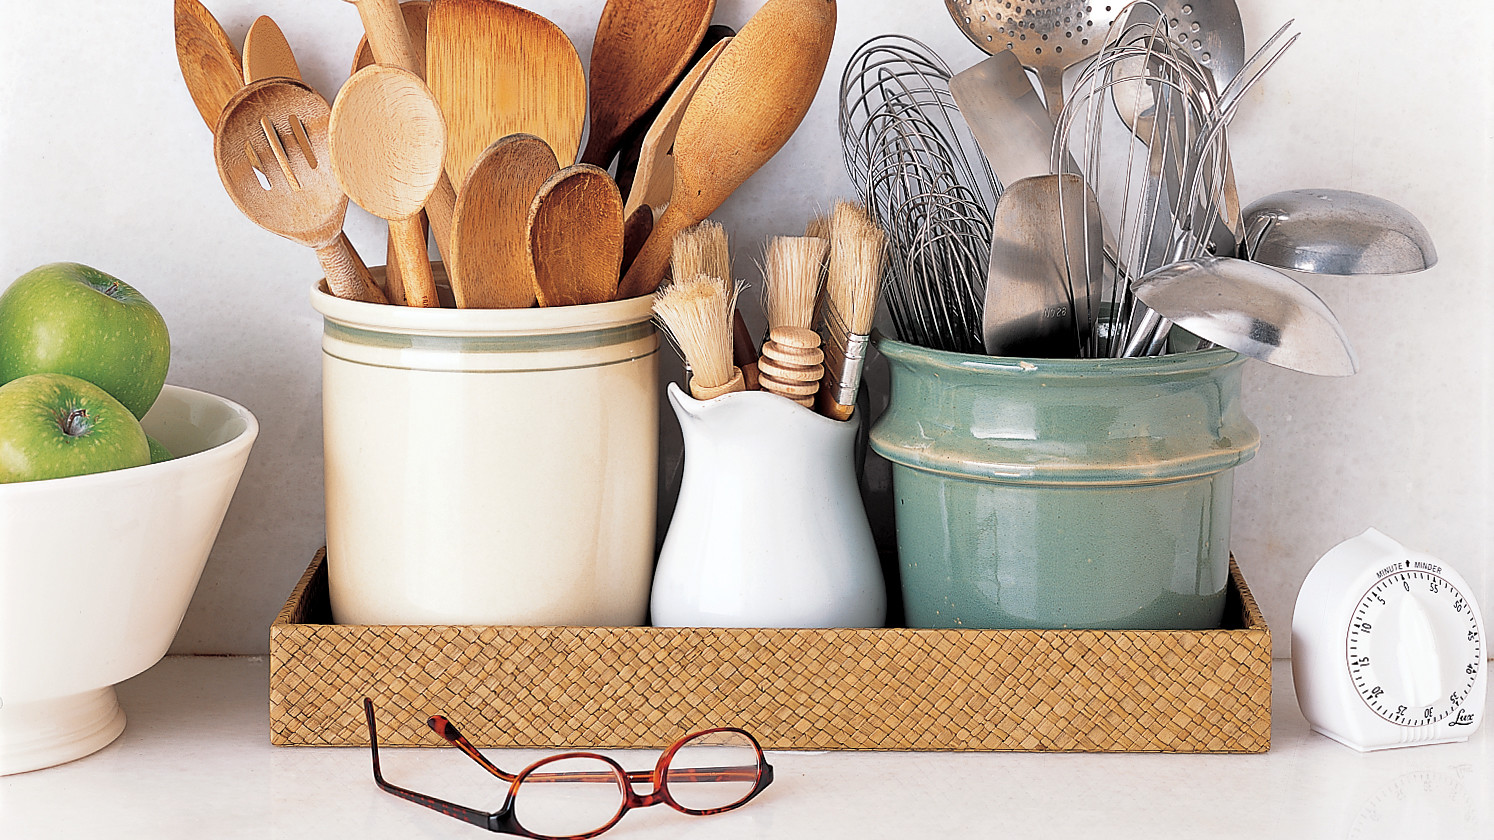  The Rules of Kitchen Storage